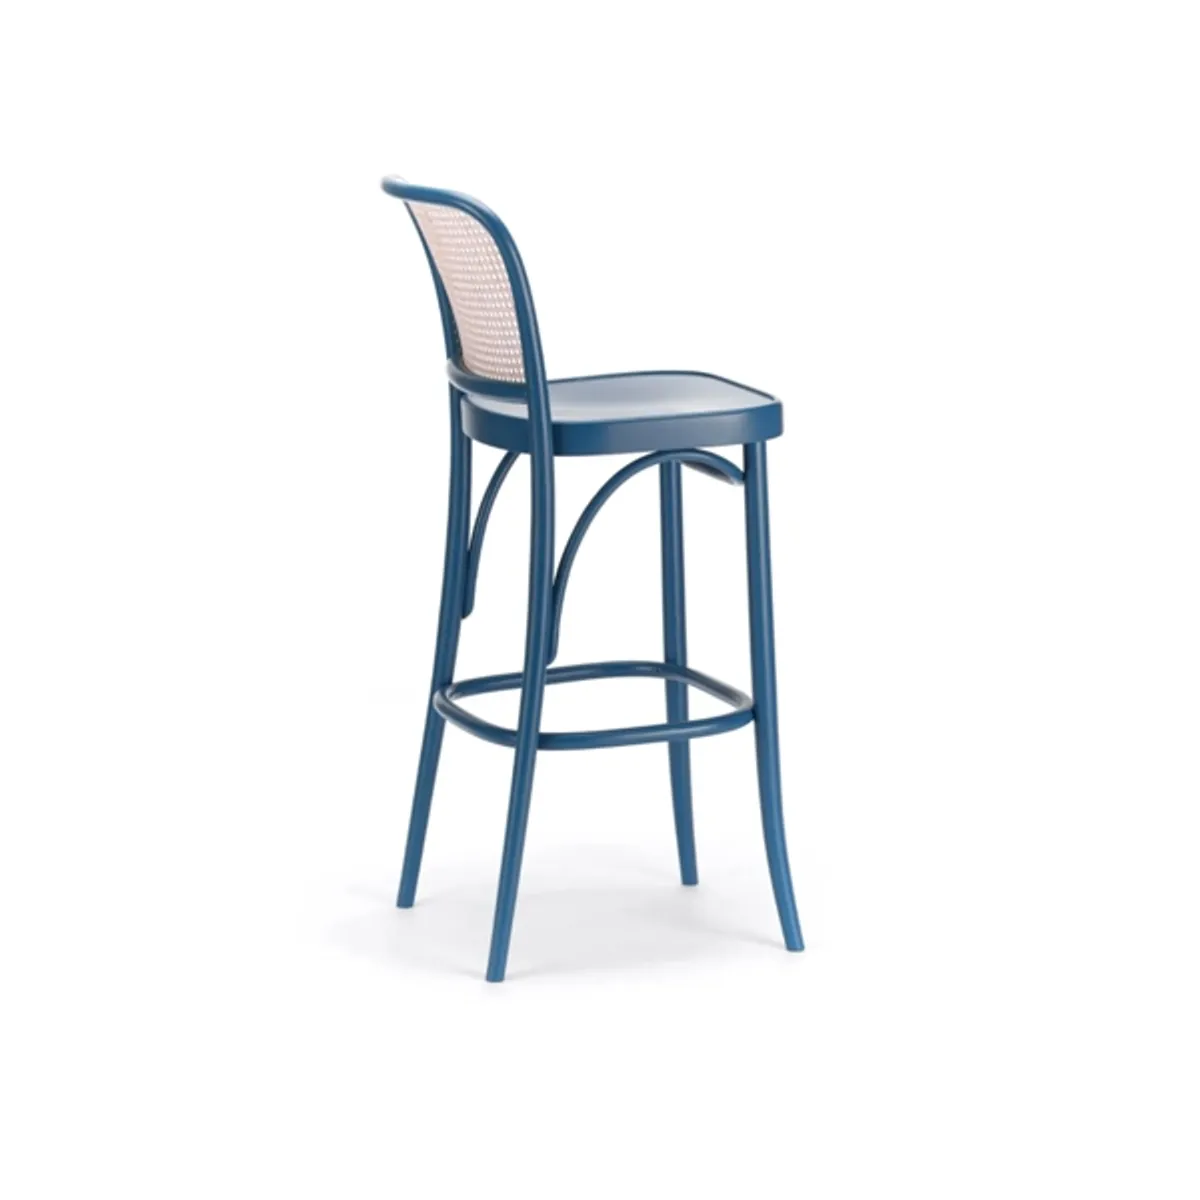 Bombay wood bar stool Inside Out Contracts3